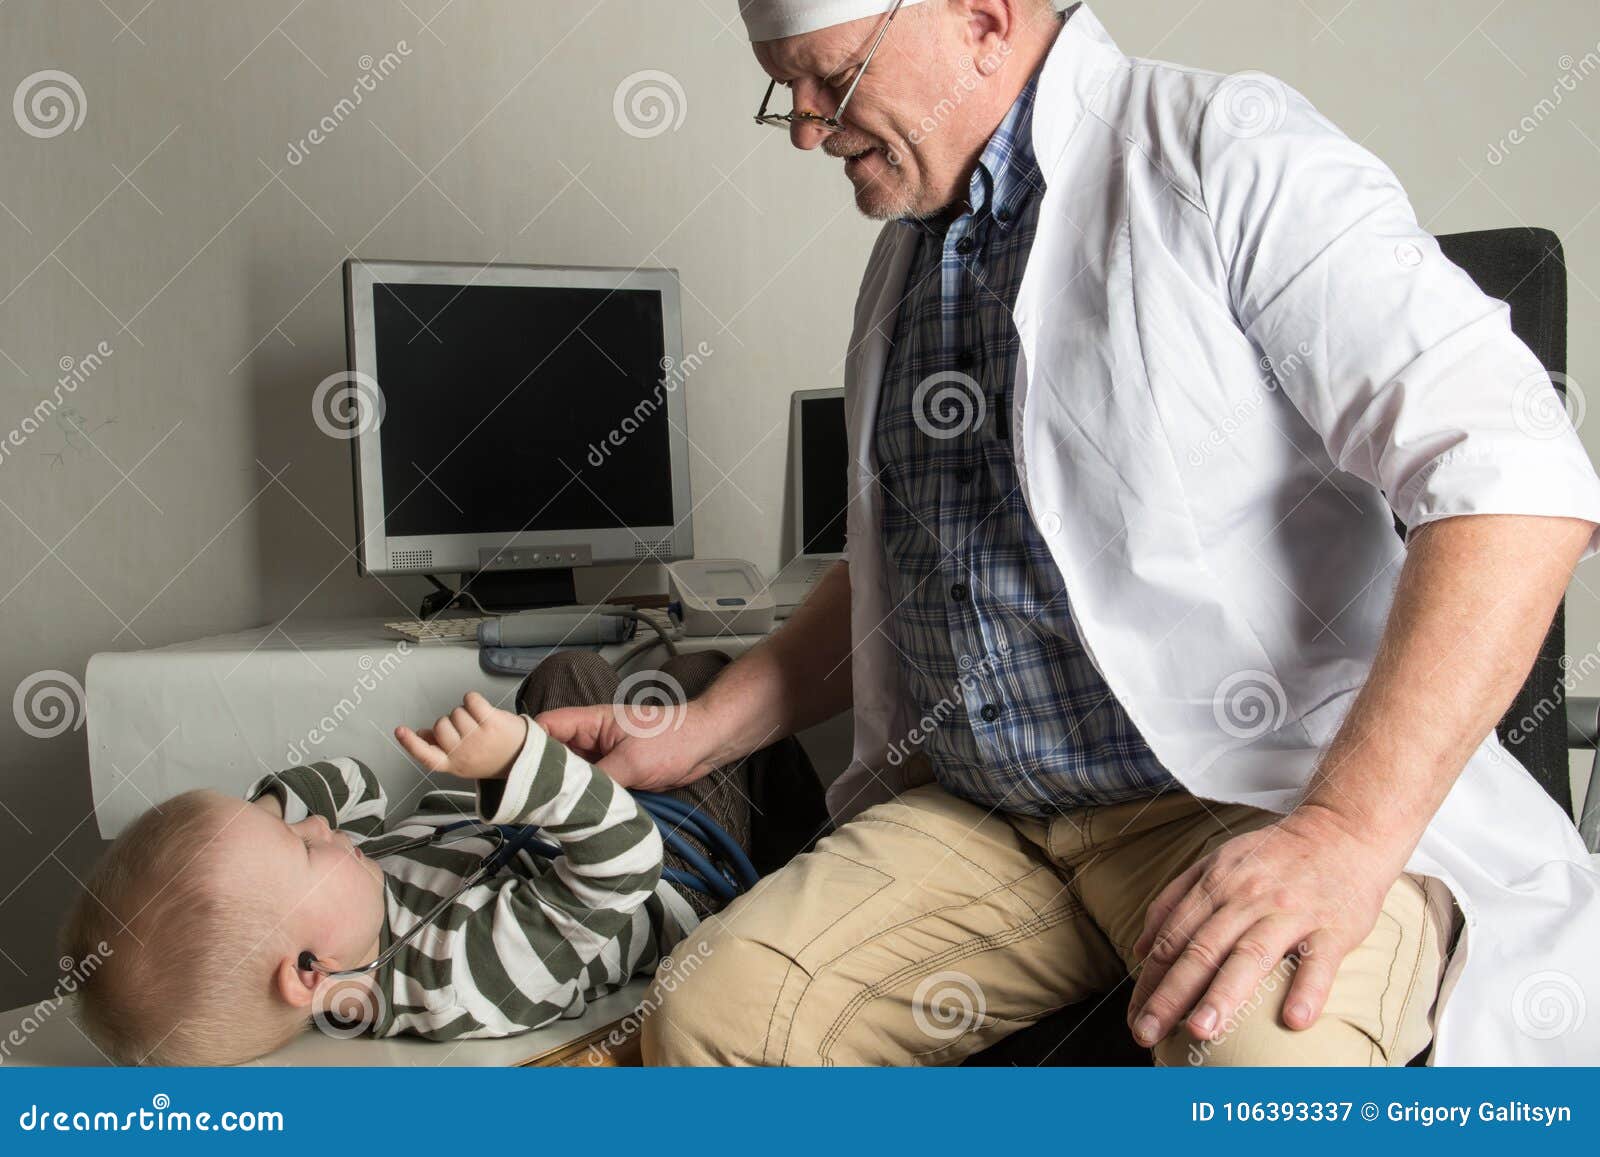 the child doctor examines the patients in his office. happy children are very fond of a good pediatrician. the concept of a home d